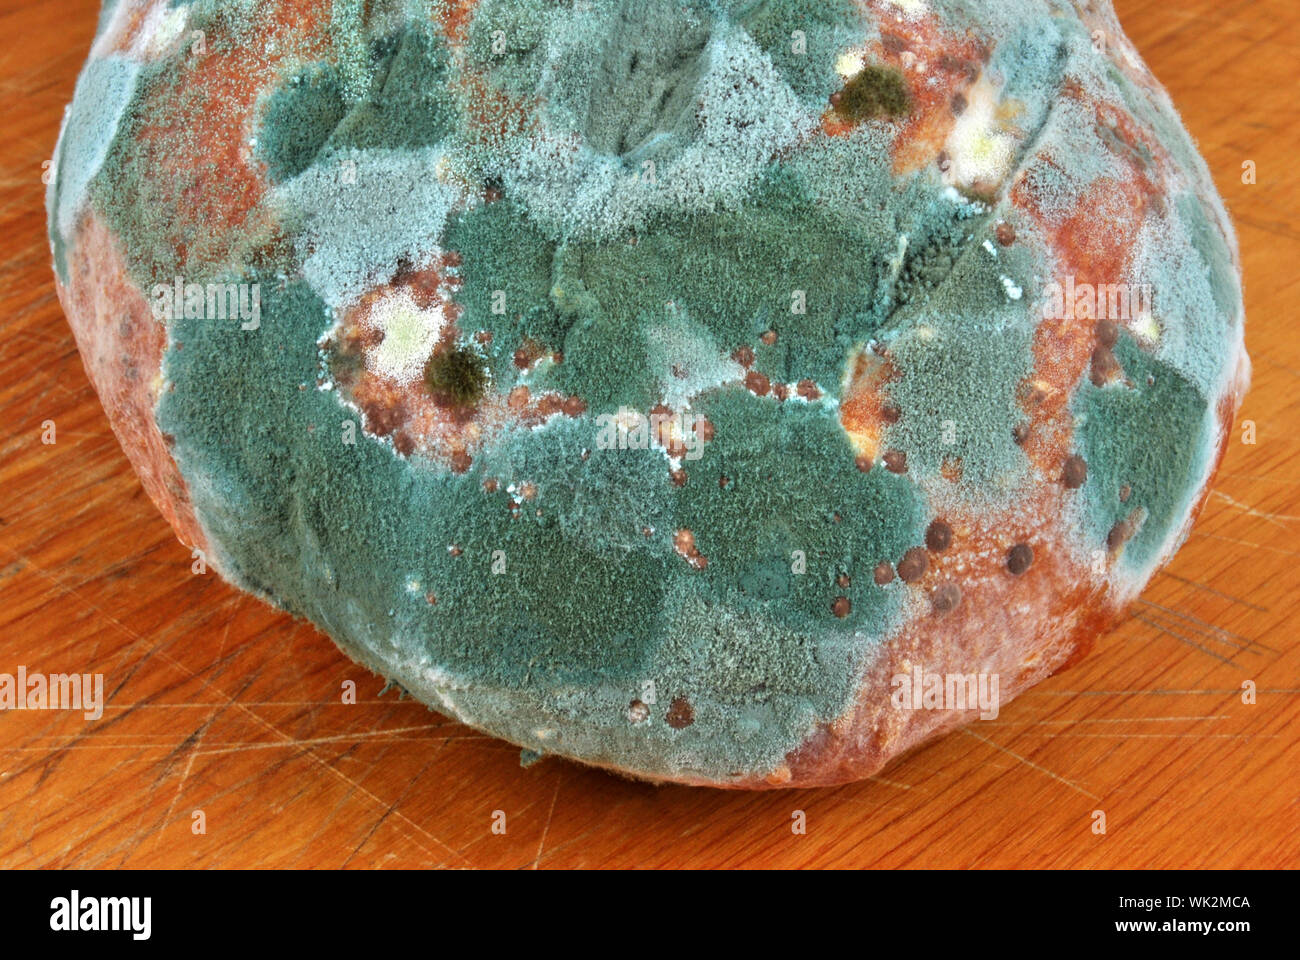 mouldy bread unhealthy to eat on a timber board Stock Photo